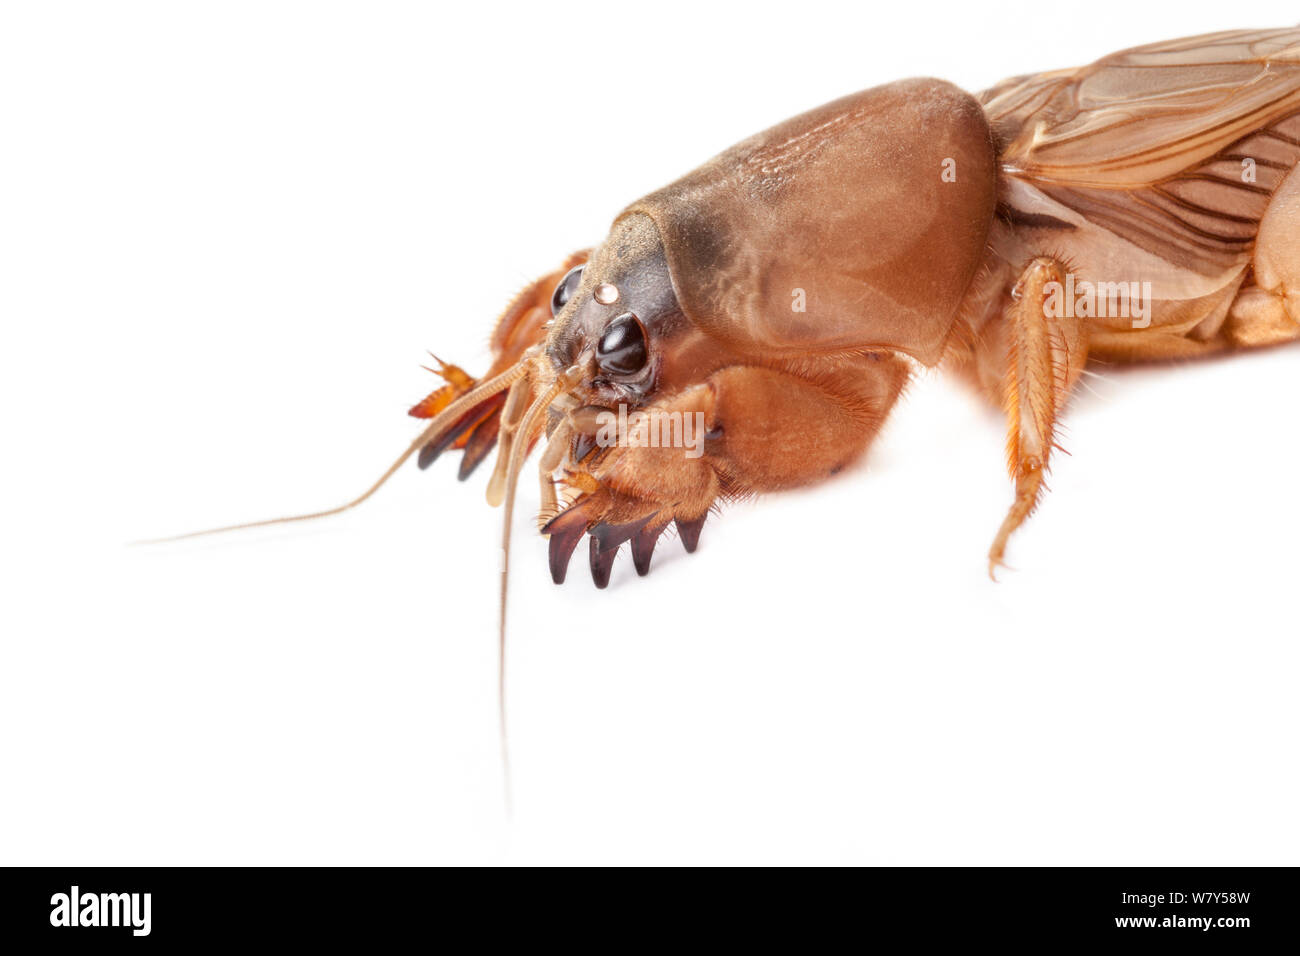 Mole cricket (Gryllotalpidae) showing shovel-like forelimbs that are well adapted to burrowing. Danum Valley, Sabah, Borneo. Stock Photo